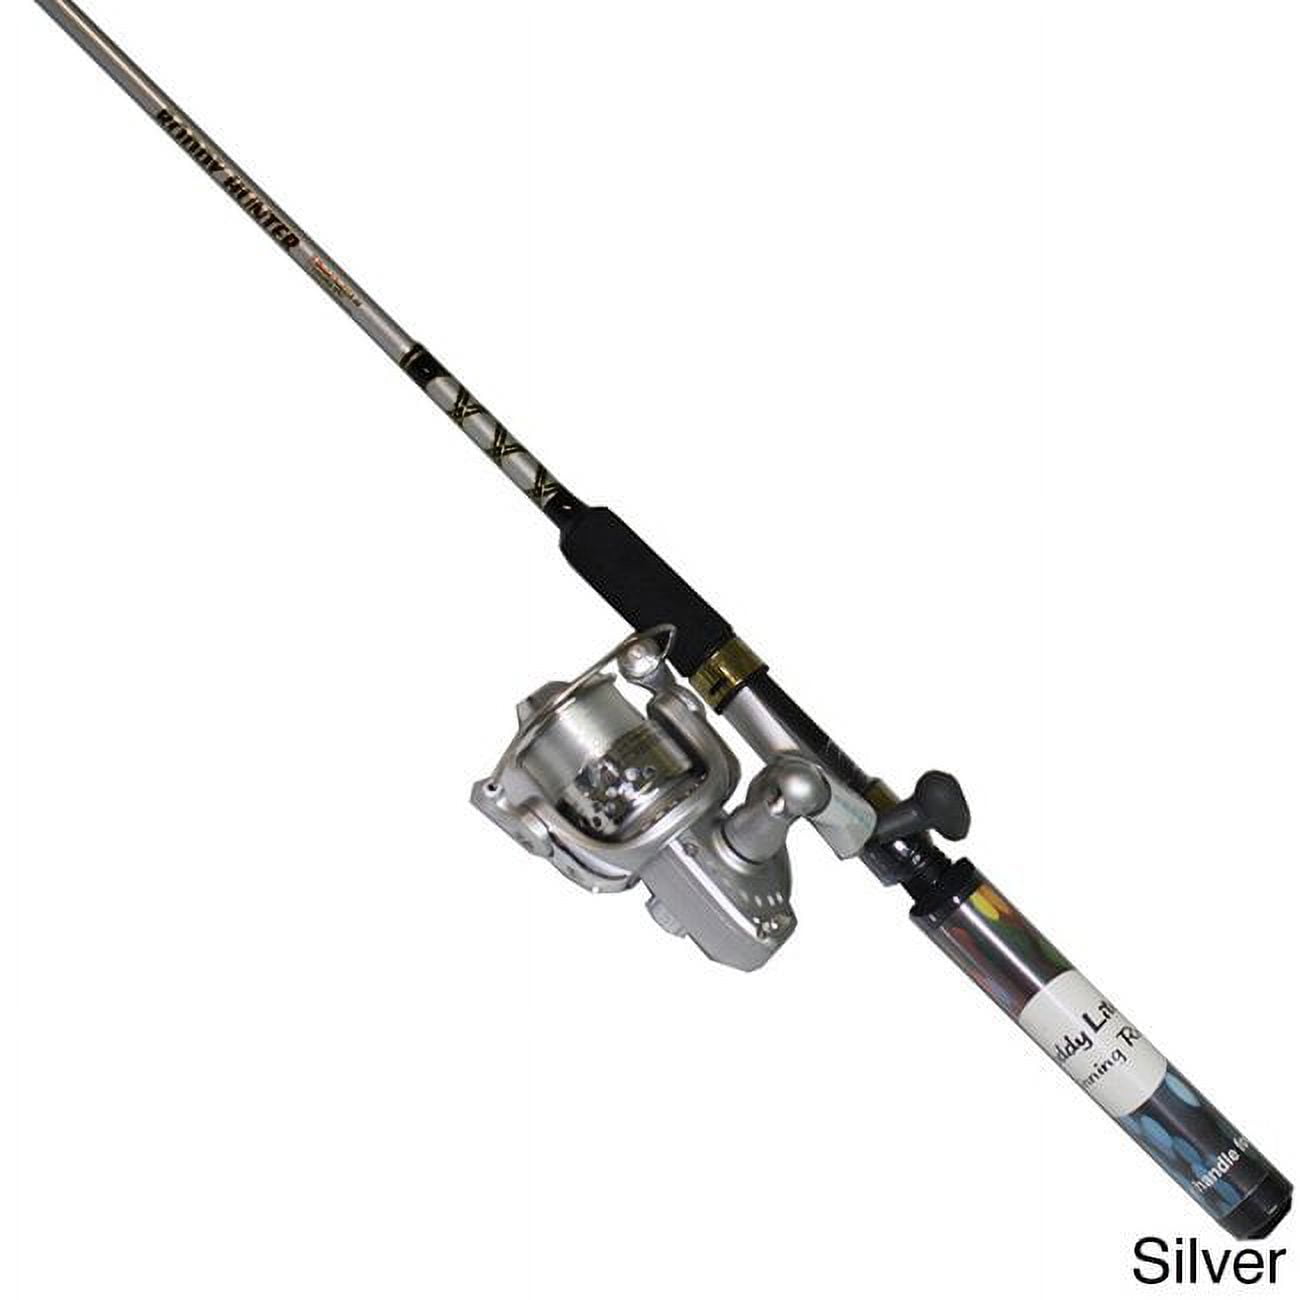 A FOX ULTRA LITE JIGMASTER TWO PIECE FISHING ROD AND ROD BAG